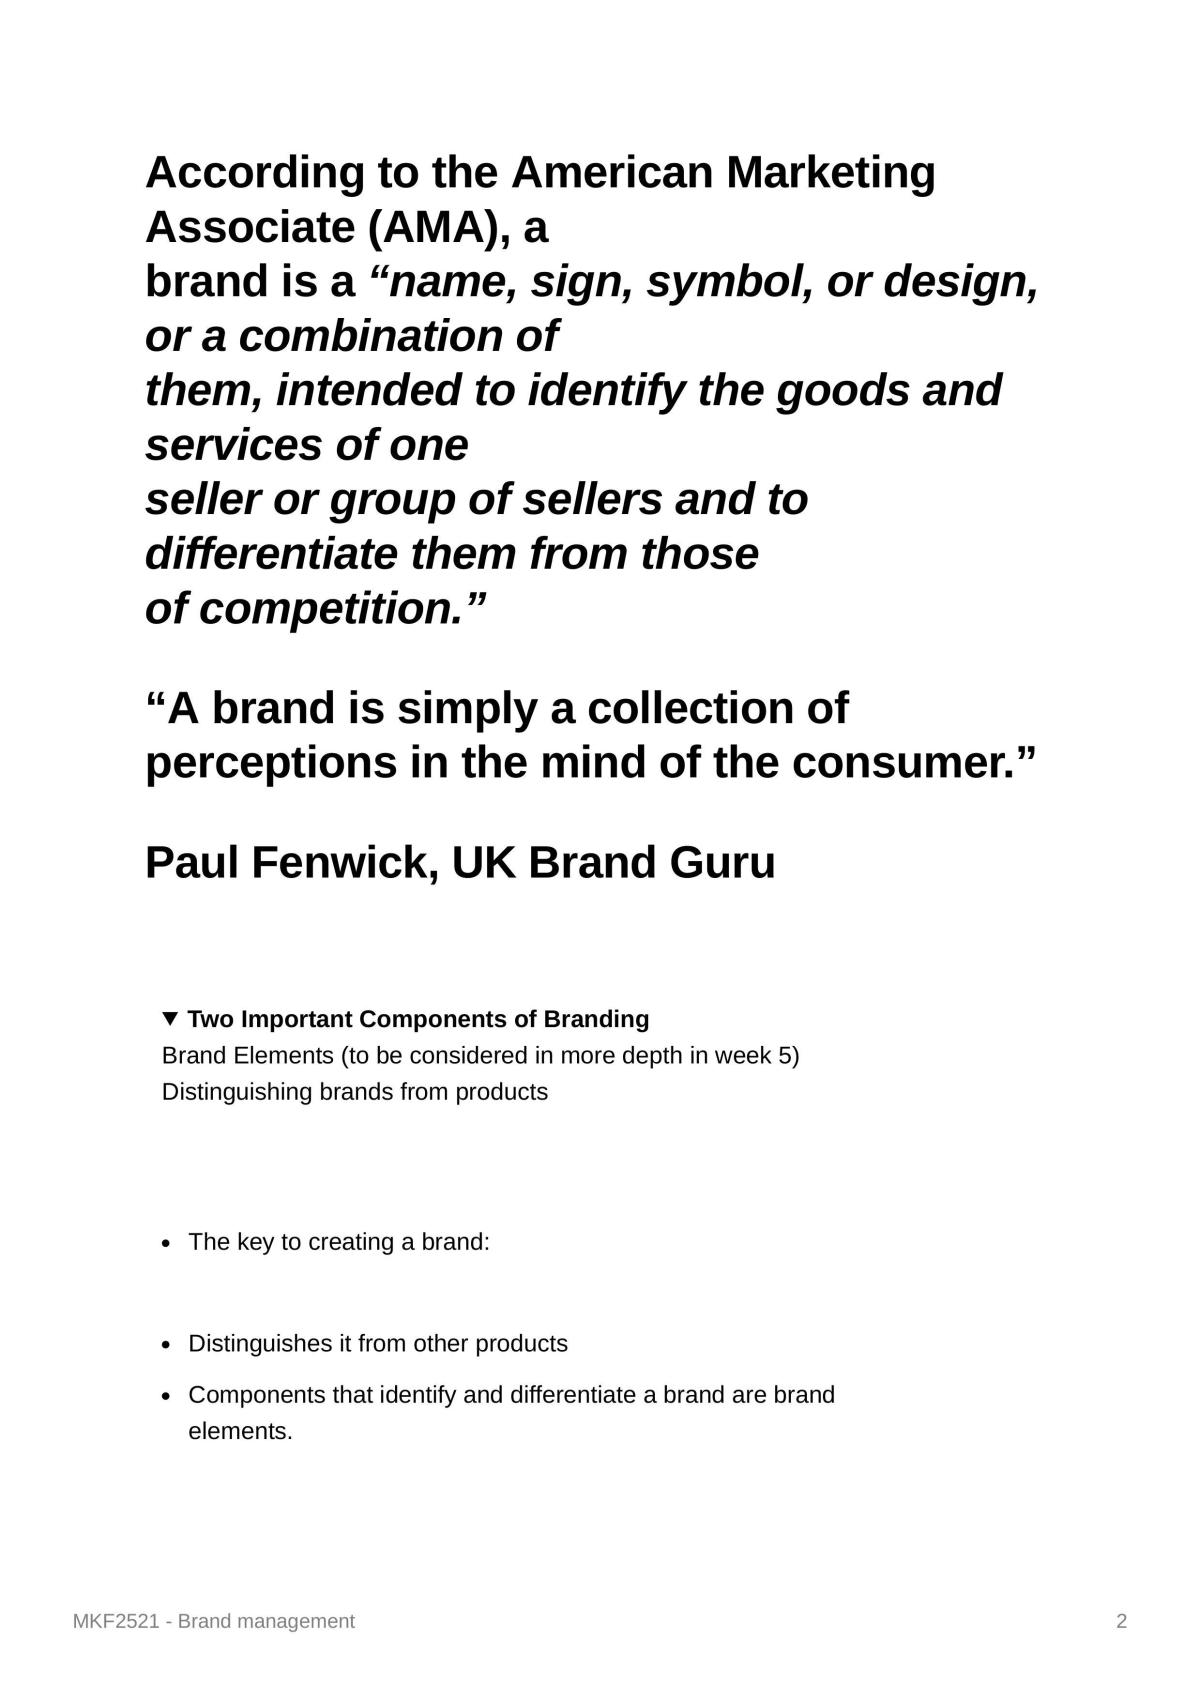 MKF2521 - Brand management Week 1 to 12 study notes - Page 2